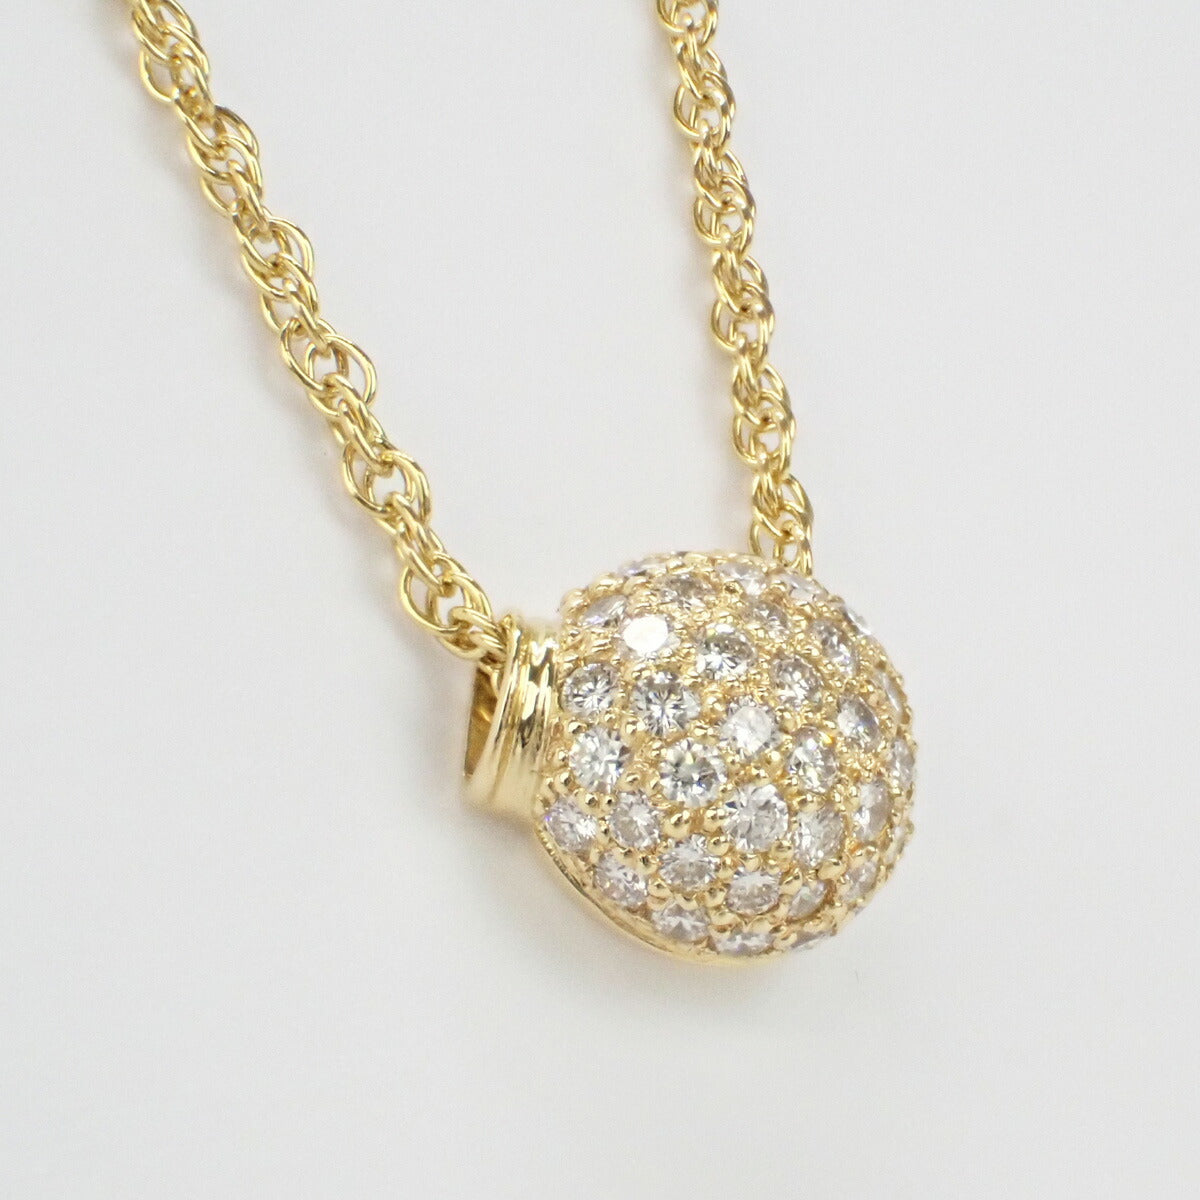 K18YG Ball Motif Diamond Necklace 0.67ct, Yellow Gold Finish, Ladies (Pre-owned)